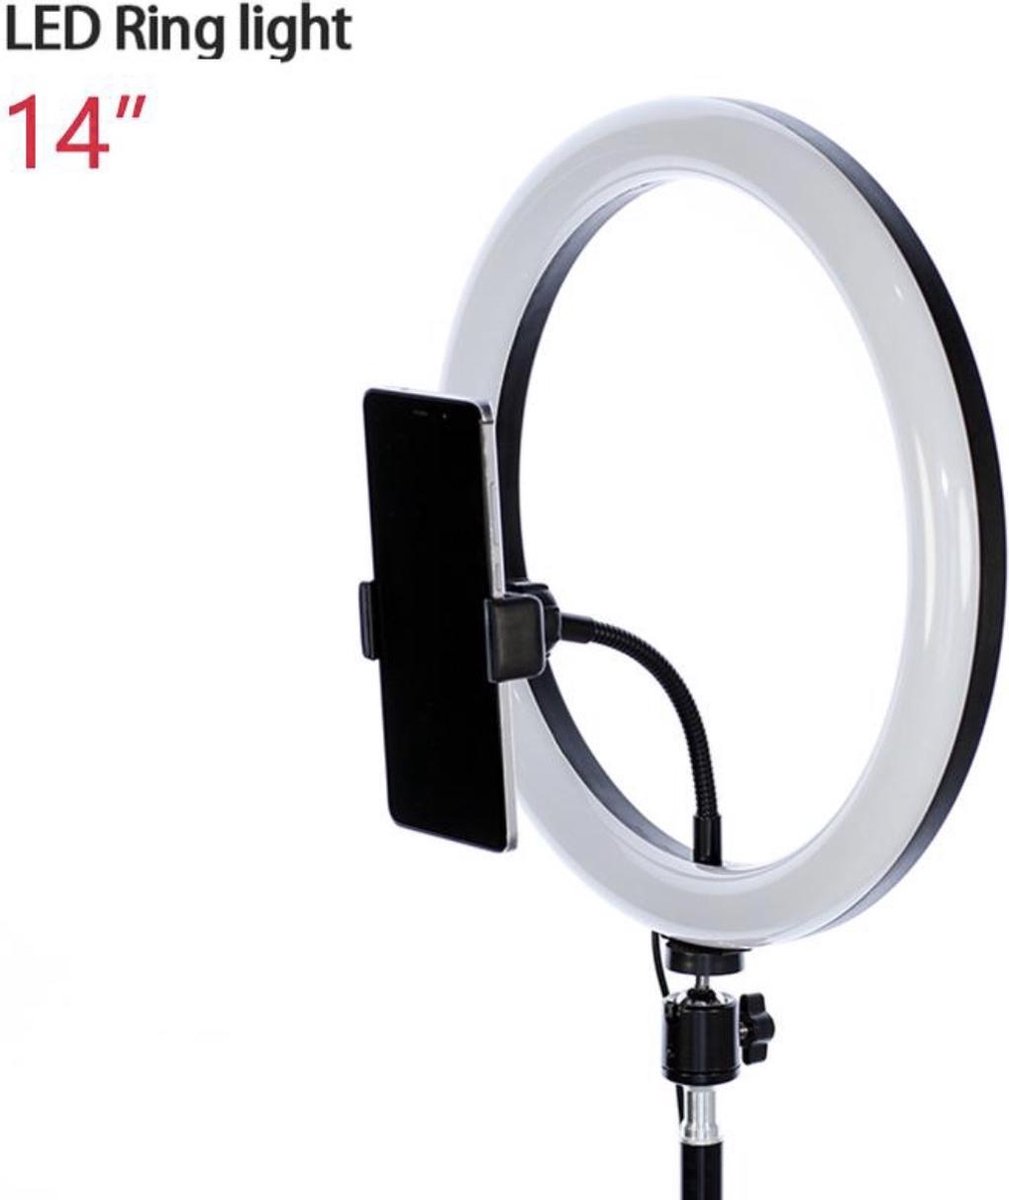 KobraTech Selfie Light Ring MiLite Phone Ring Light iPhone & Android Compatible with Remote Shutter 